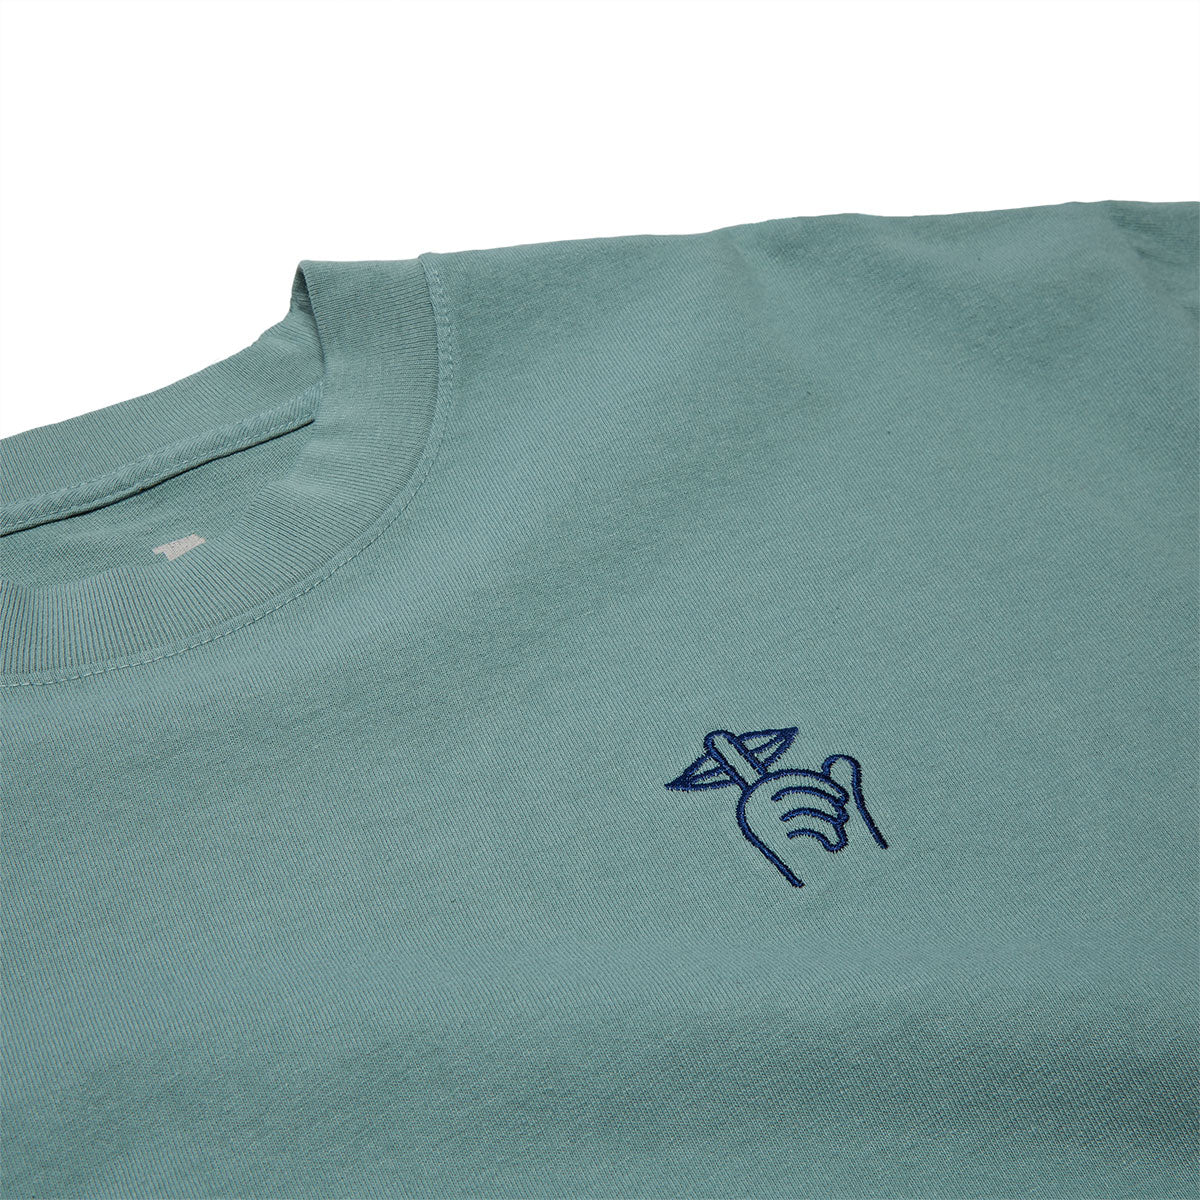 The Quiet Life Shhh Embroideree T-Shirt - Mist Green image 2